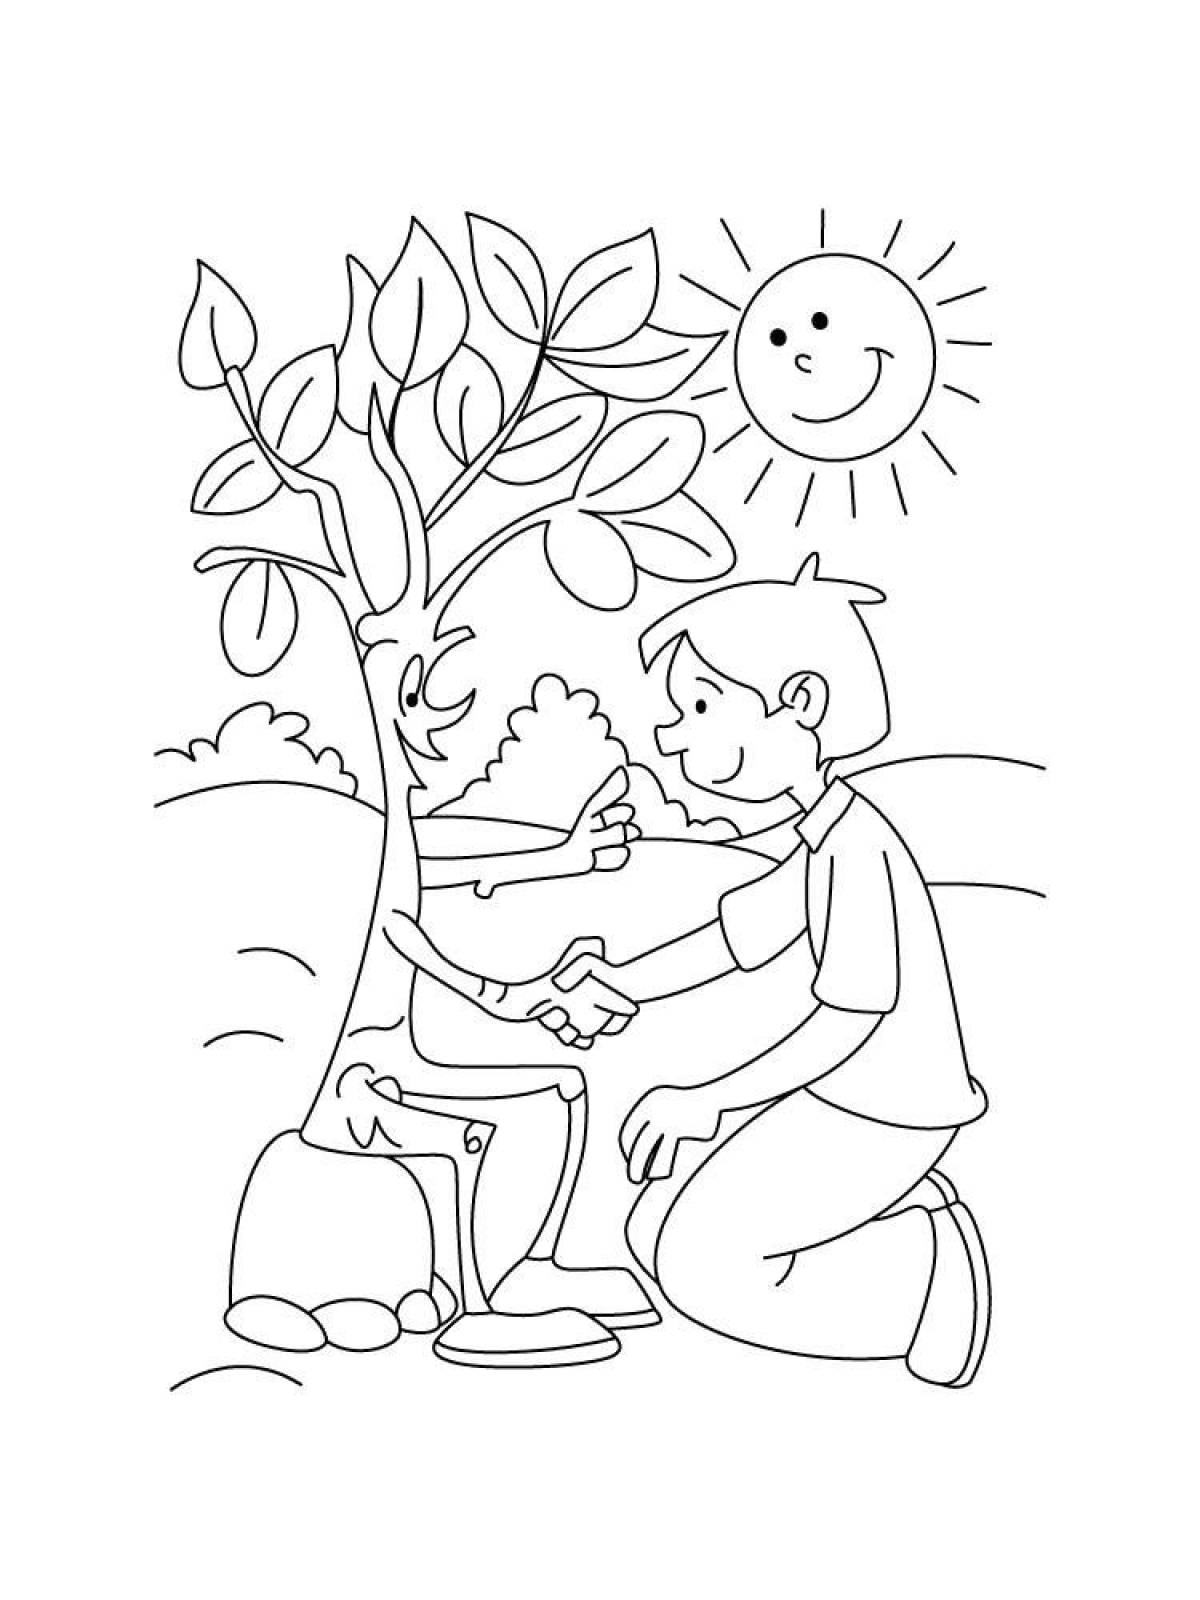 Coloring page magical environment